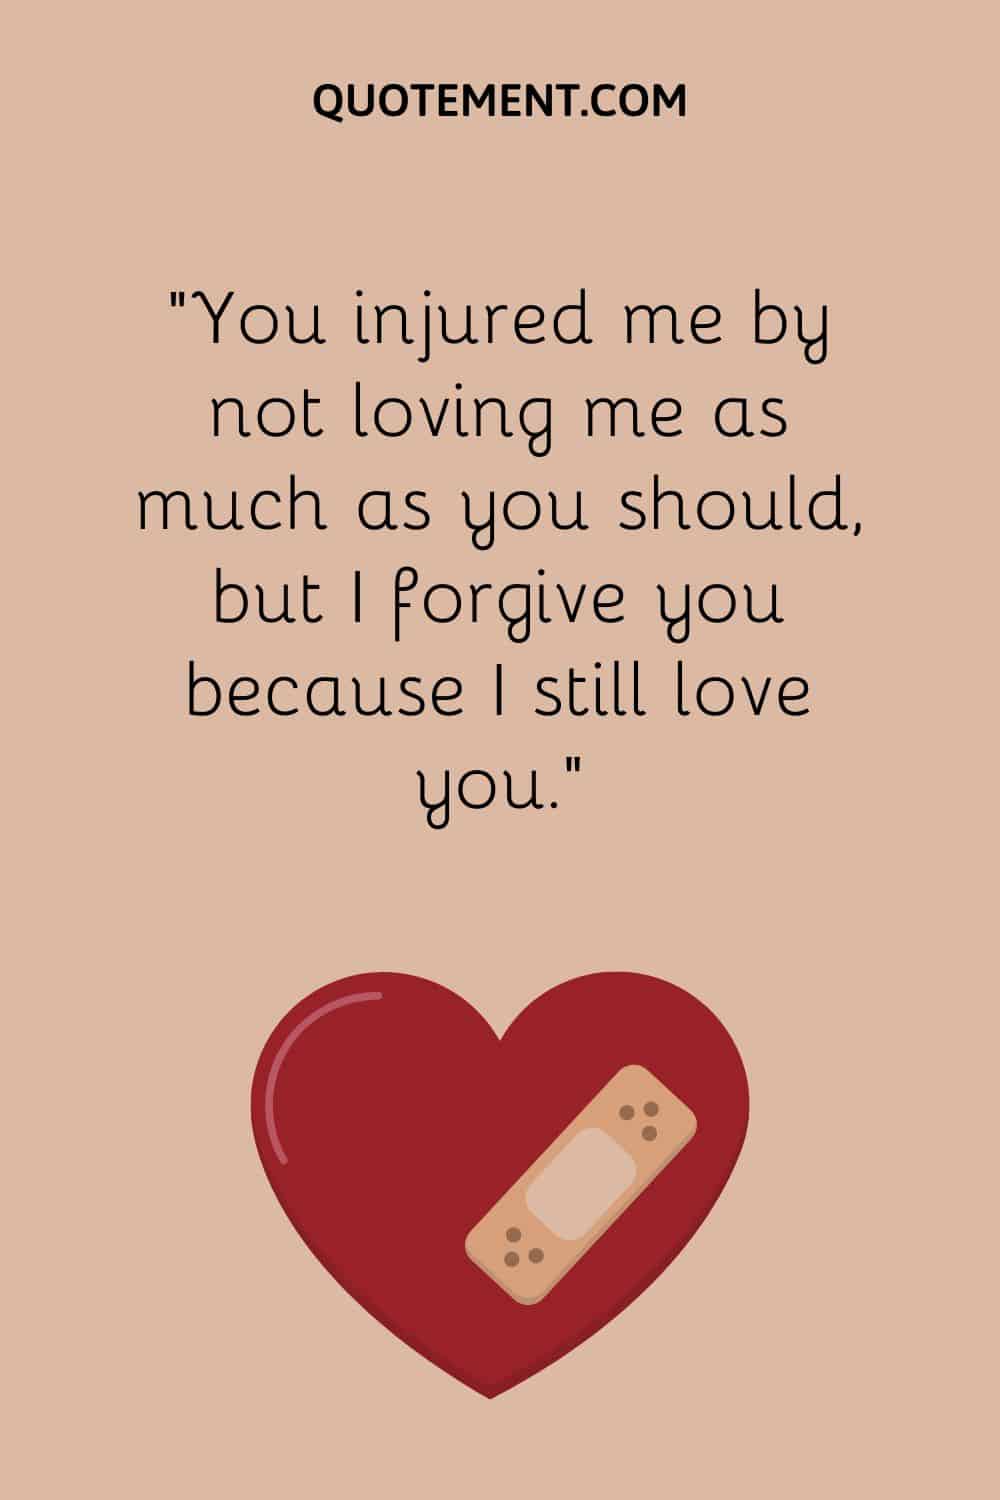 You injured me by not loving me as much as you should